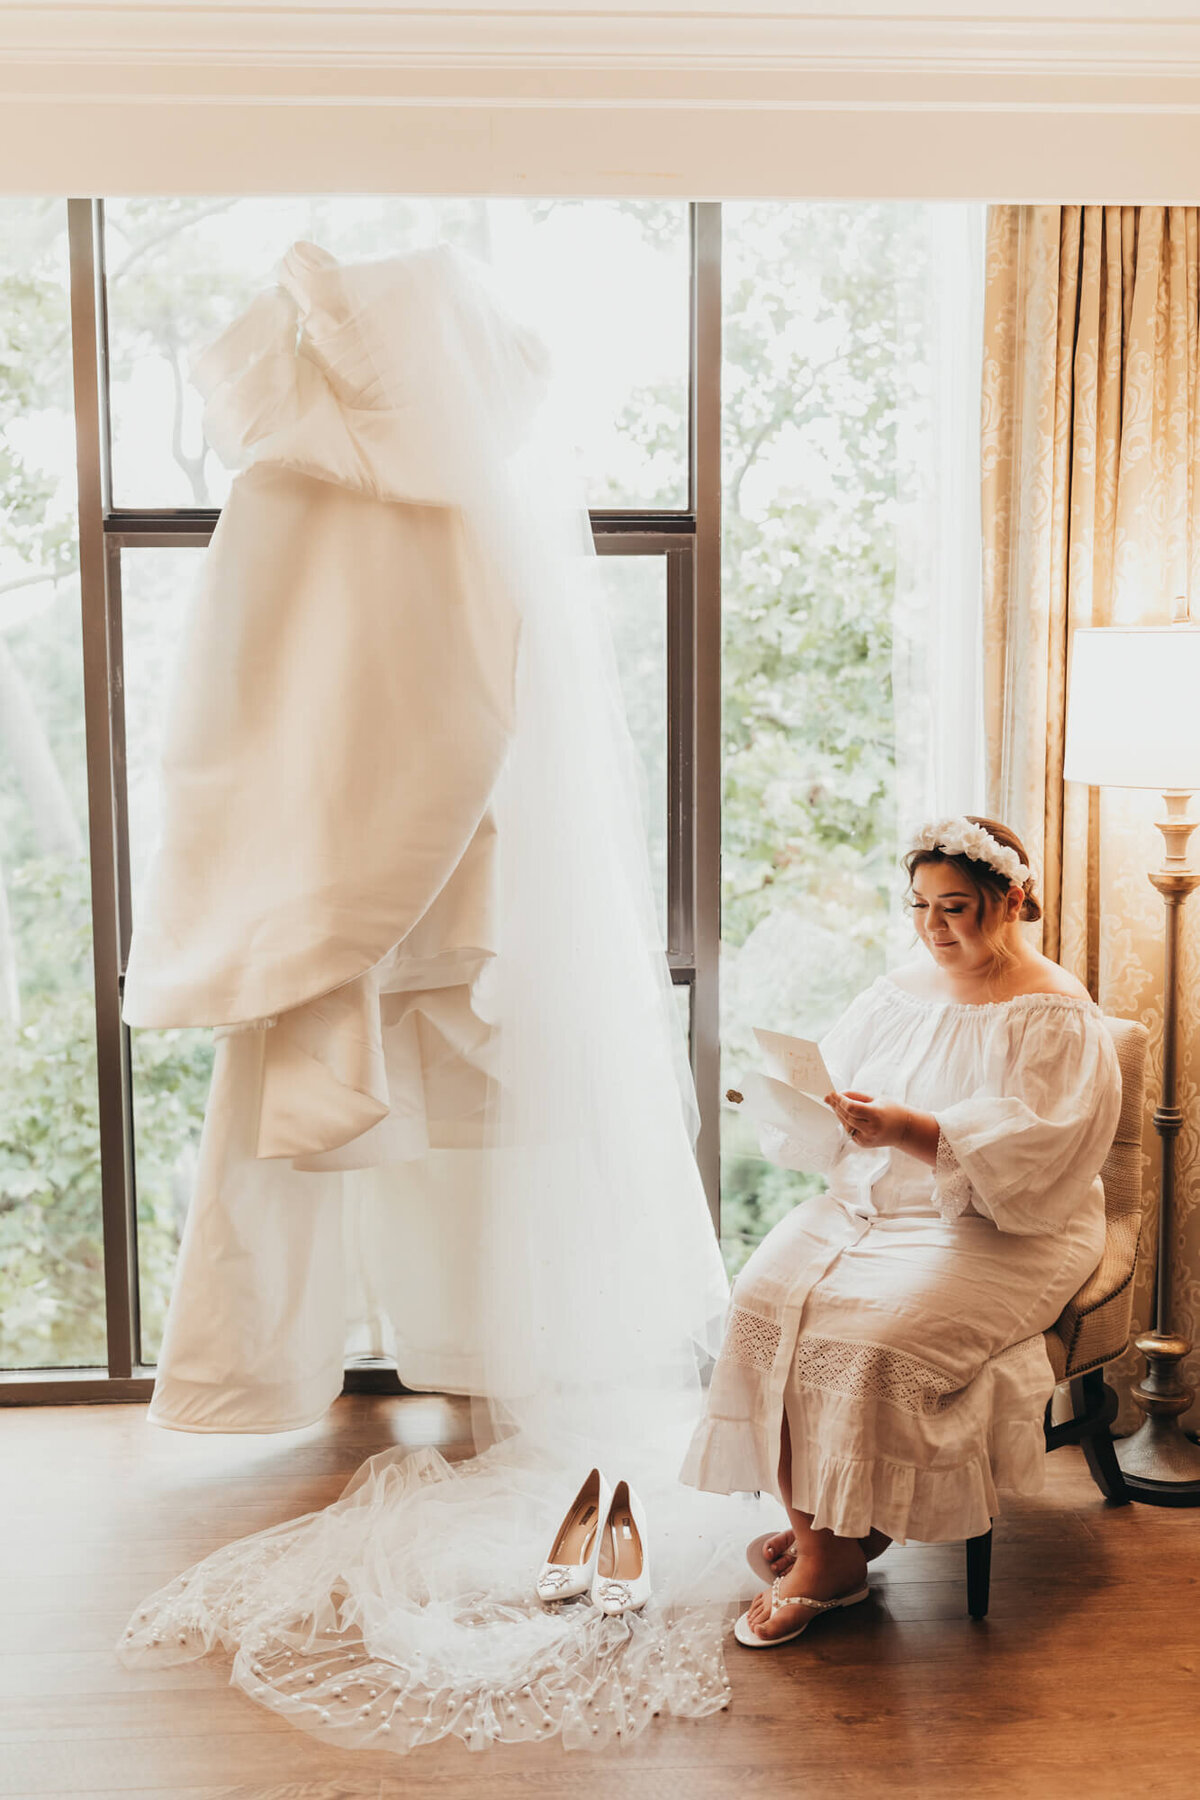 Ally's Photography captures Annie reading a card from her soon to be husband at The Houstonian hotel.